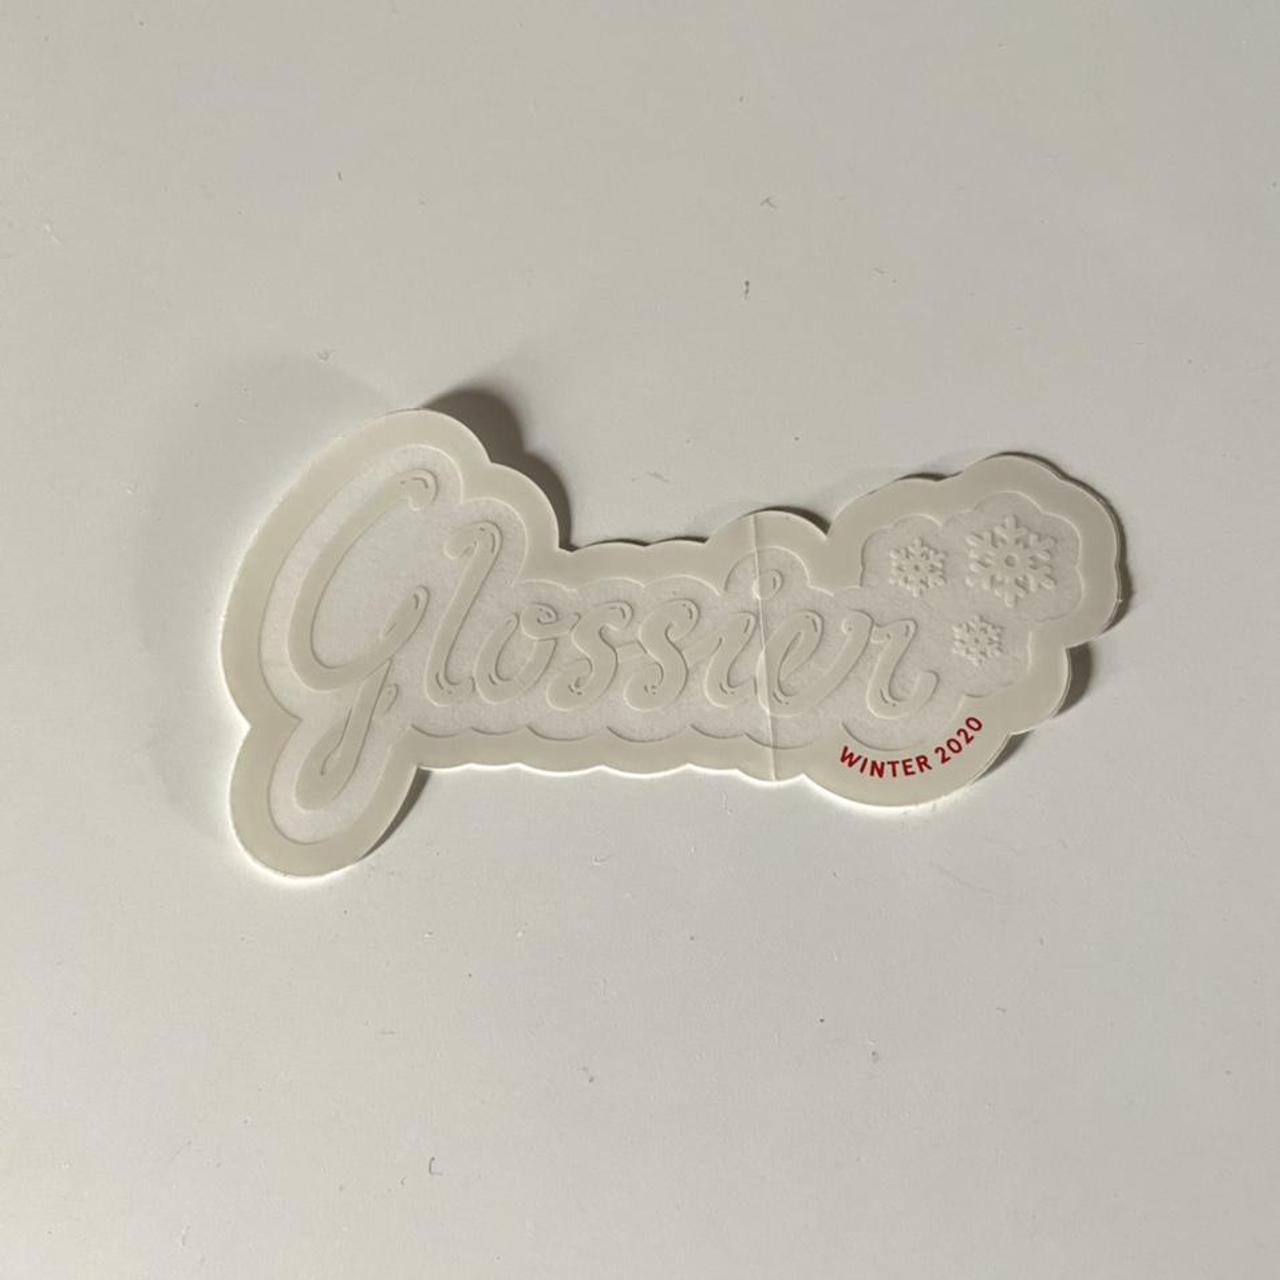 Product Image 1 - Glossier winter 2020 transparent sticker
Free